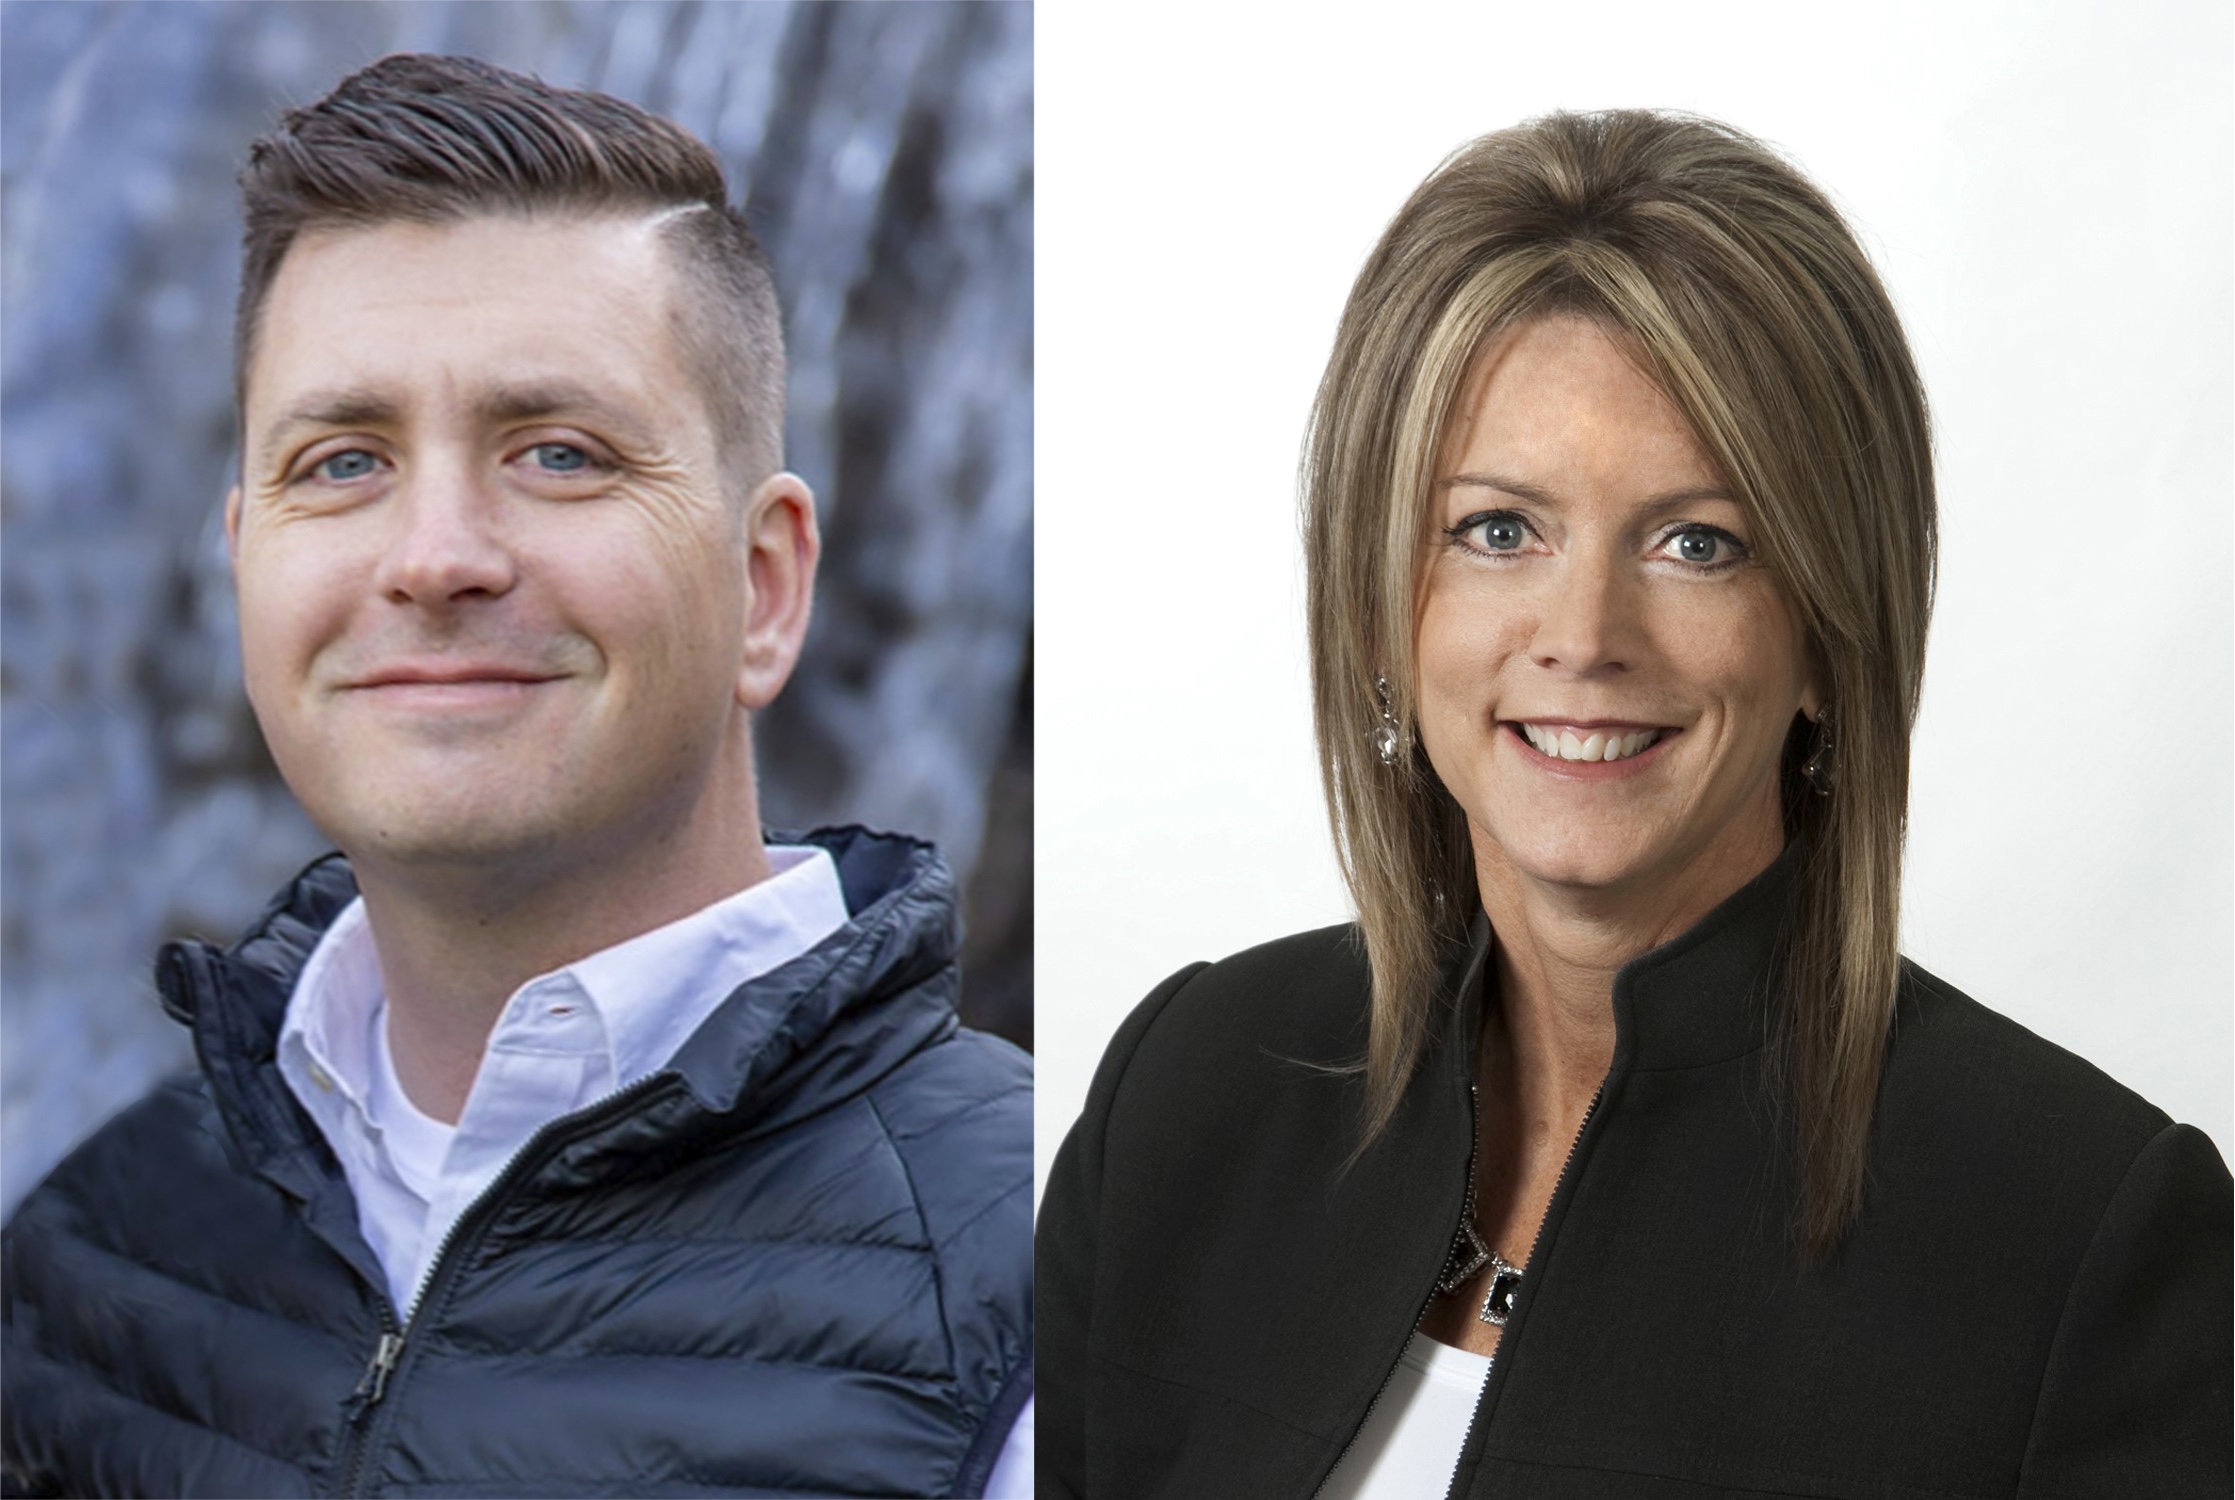 Read more about SFCC Foundation adds Chris Guffey and Wendy Loges to Board of Directors